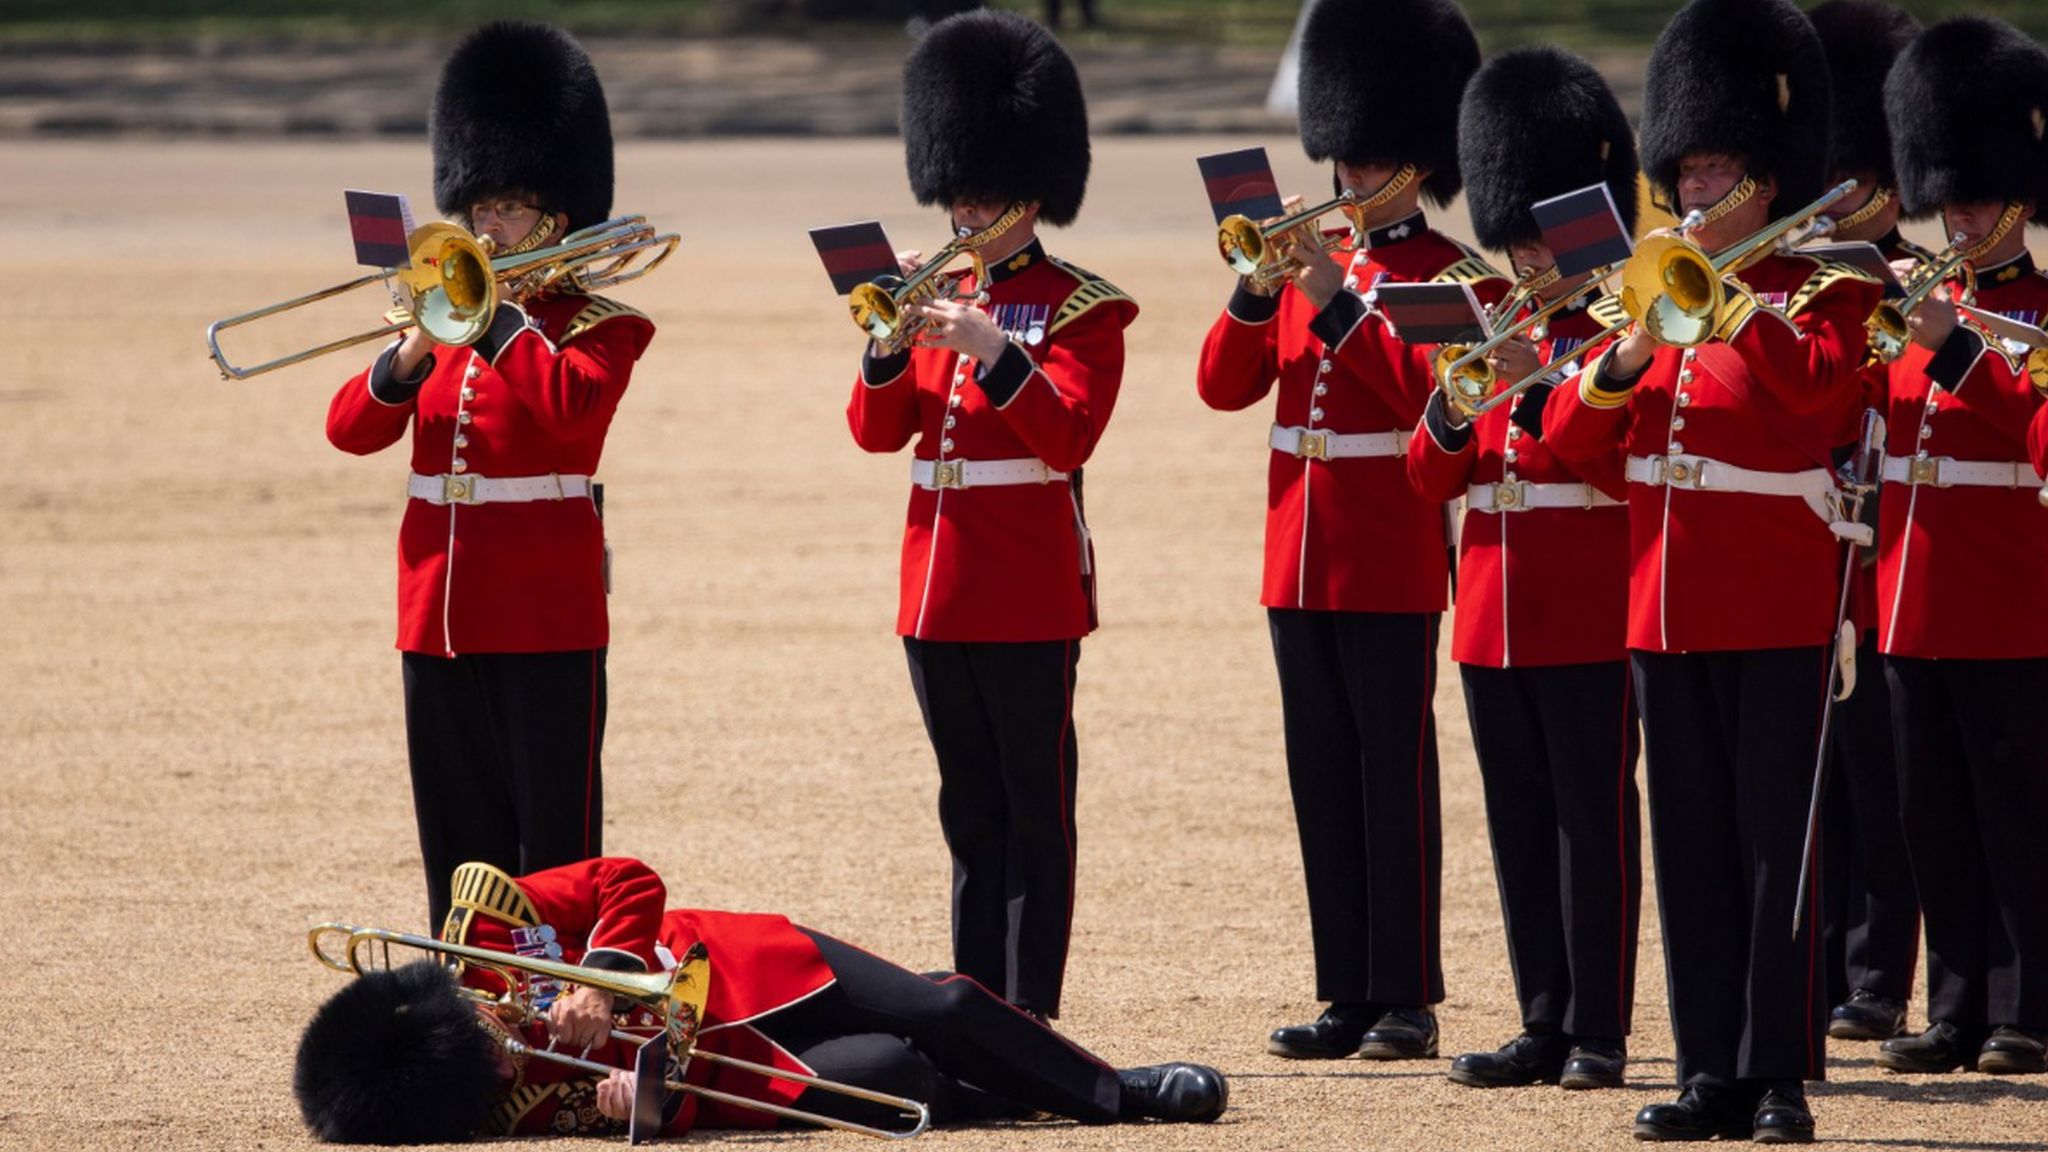 A member of the Massed Bands of the Household Division faints due to heat exhaustion whilst participating in the Colonel's Review at Horse Guards Parade in London